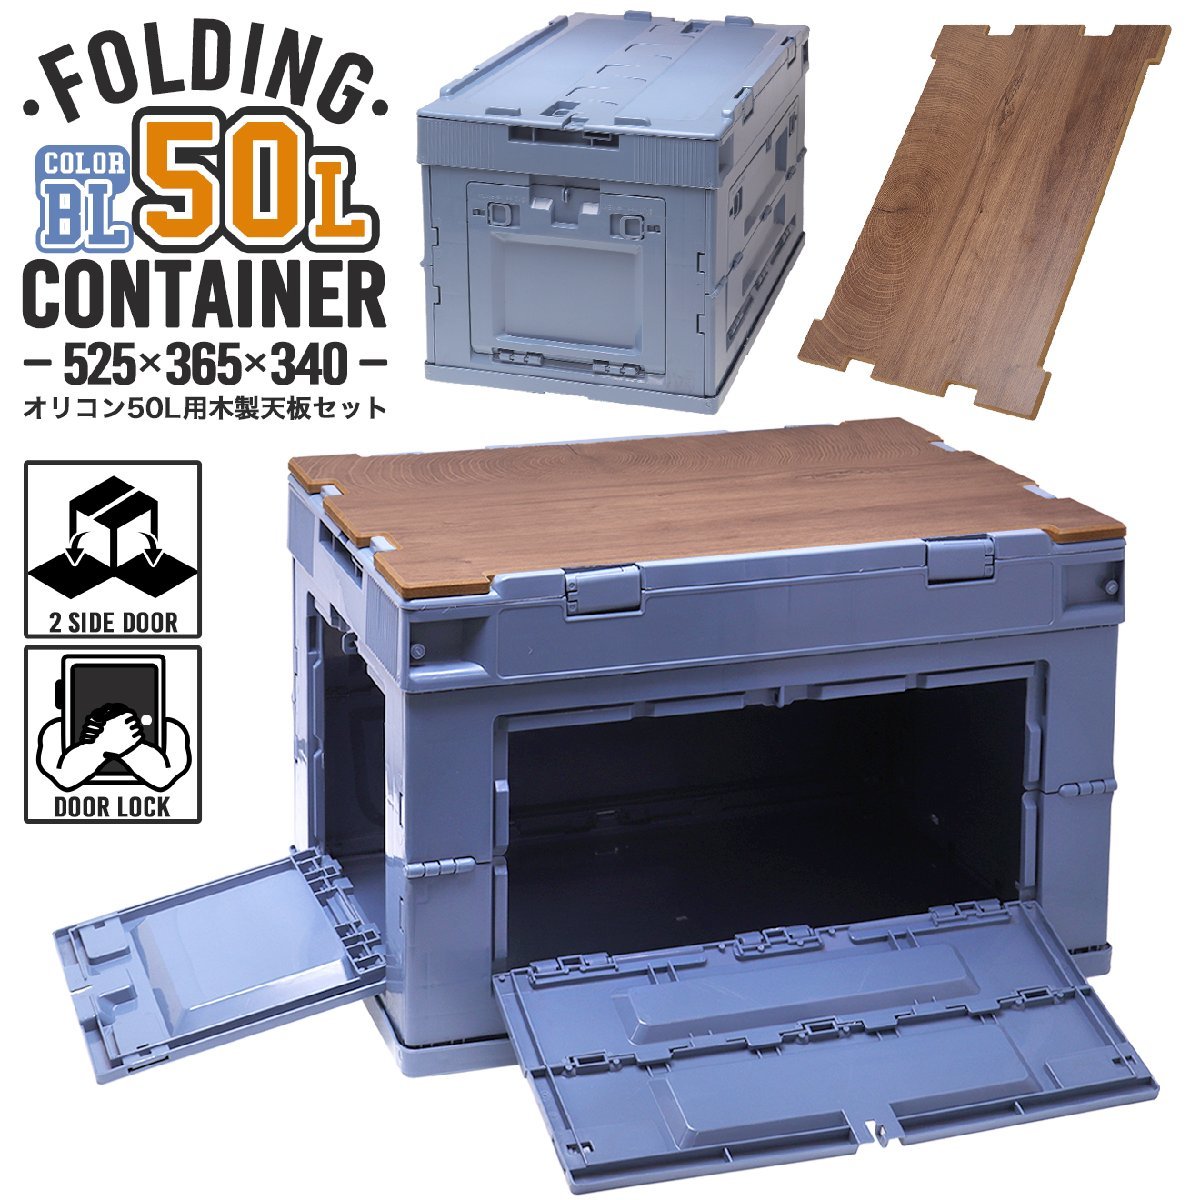 FDC0004BL-TS military base folding container 50L middle window 2 place attaching ( long side 1& short side 1)& wooden tabletop set 